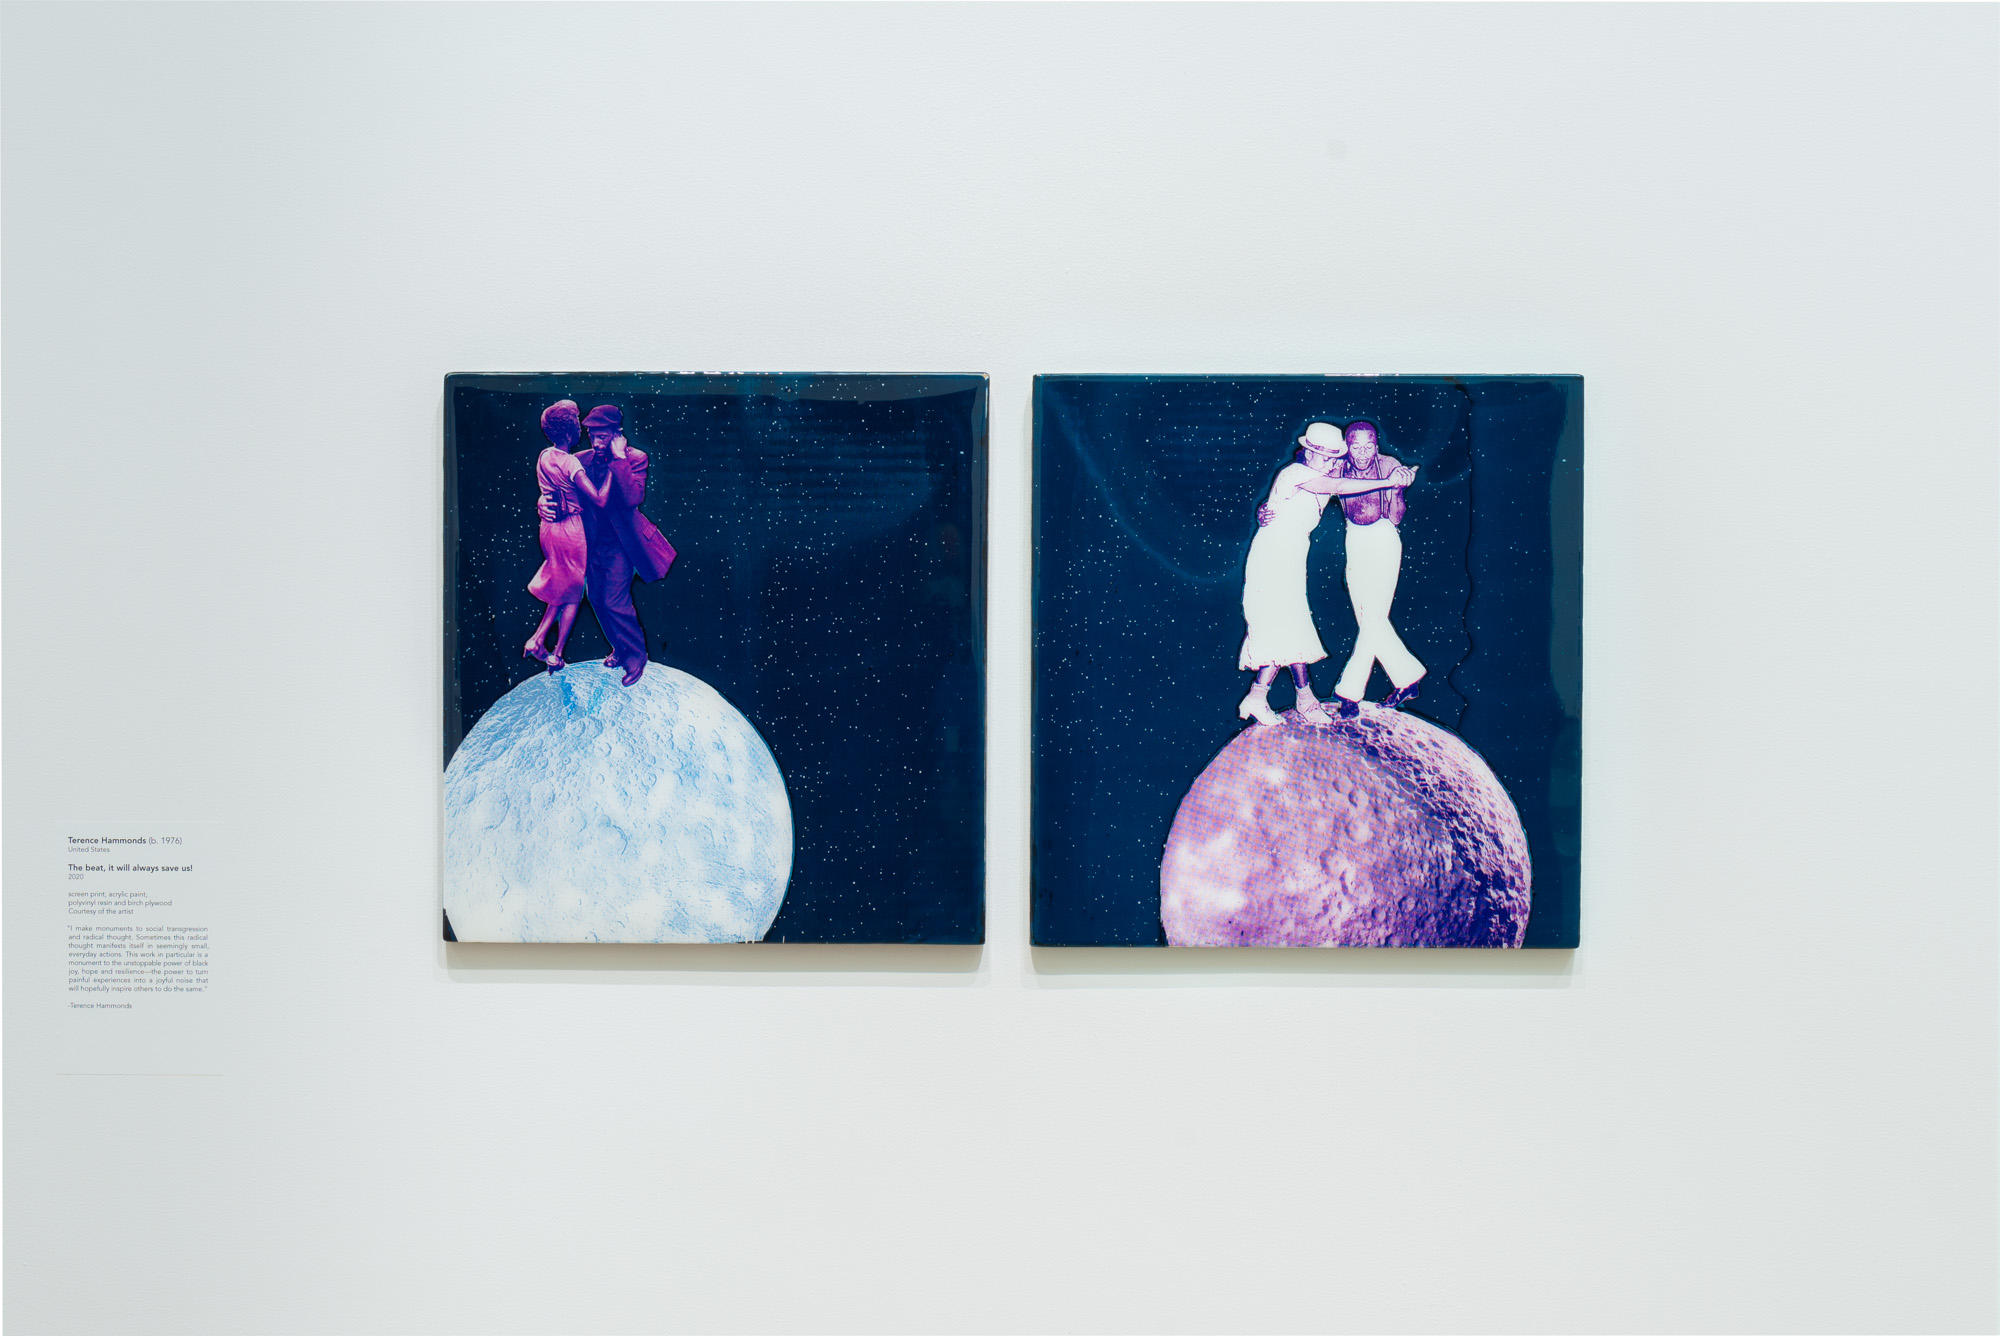 Terence Hammonds'  The beat, it will always save us! Two square screen prints of African American couples dancing on small moons in front of a night sky. The couples are printed in deep purple hues.